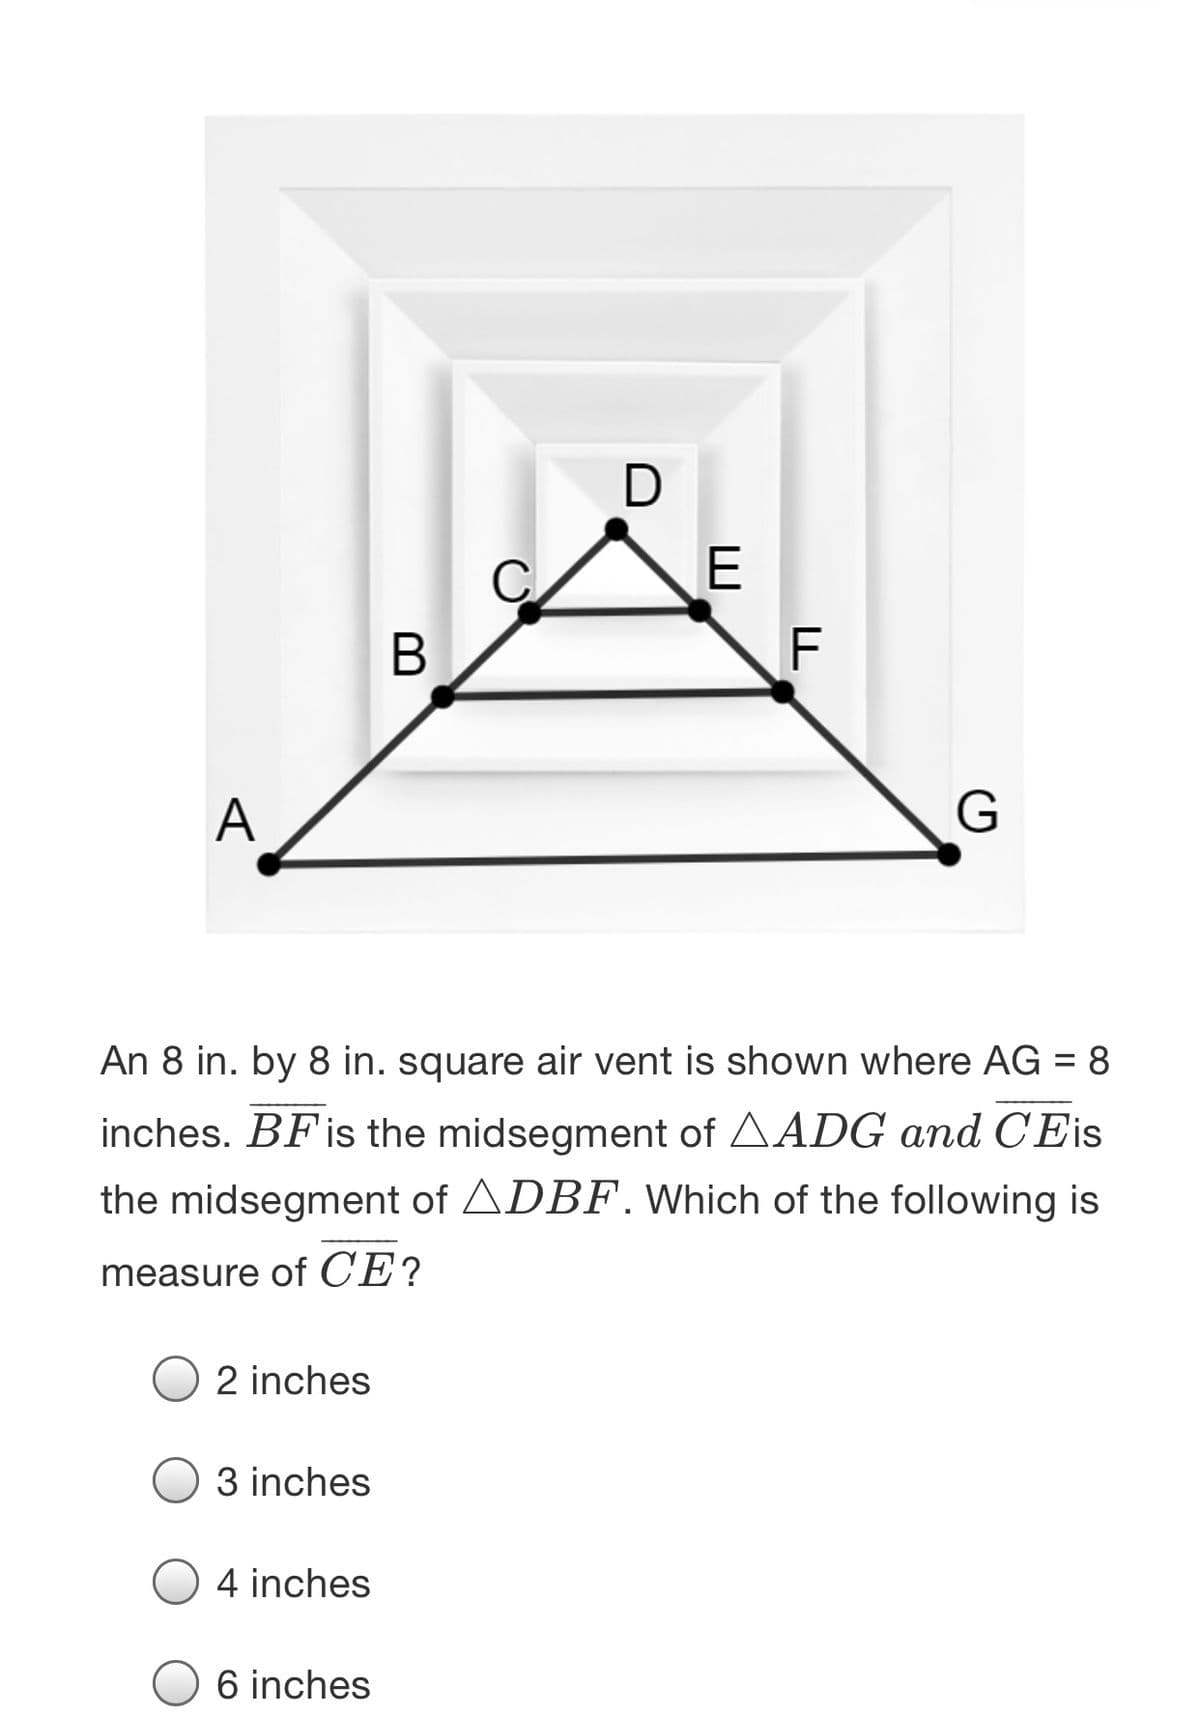 В
F
A
An 8 in. by 8 in. square air vent is shown where AG = 8
inches. BFis the midsegment of AADG and C'Eis
the midsegment of ADBF. Which of the following is
measure of CE?
2 inches
3 inches
4 inches
6 inches
